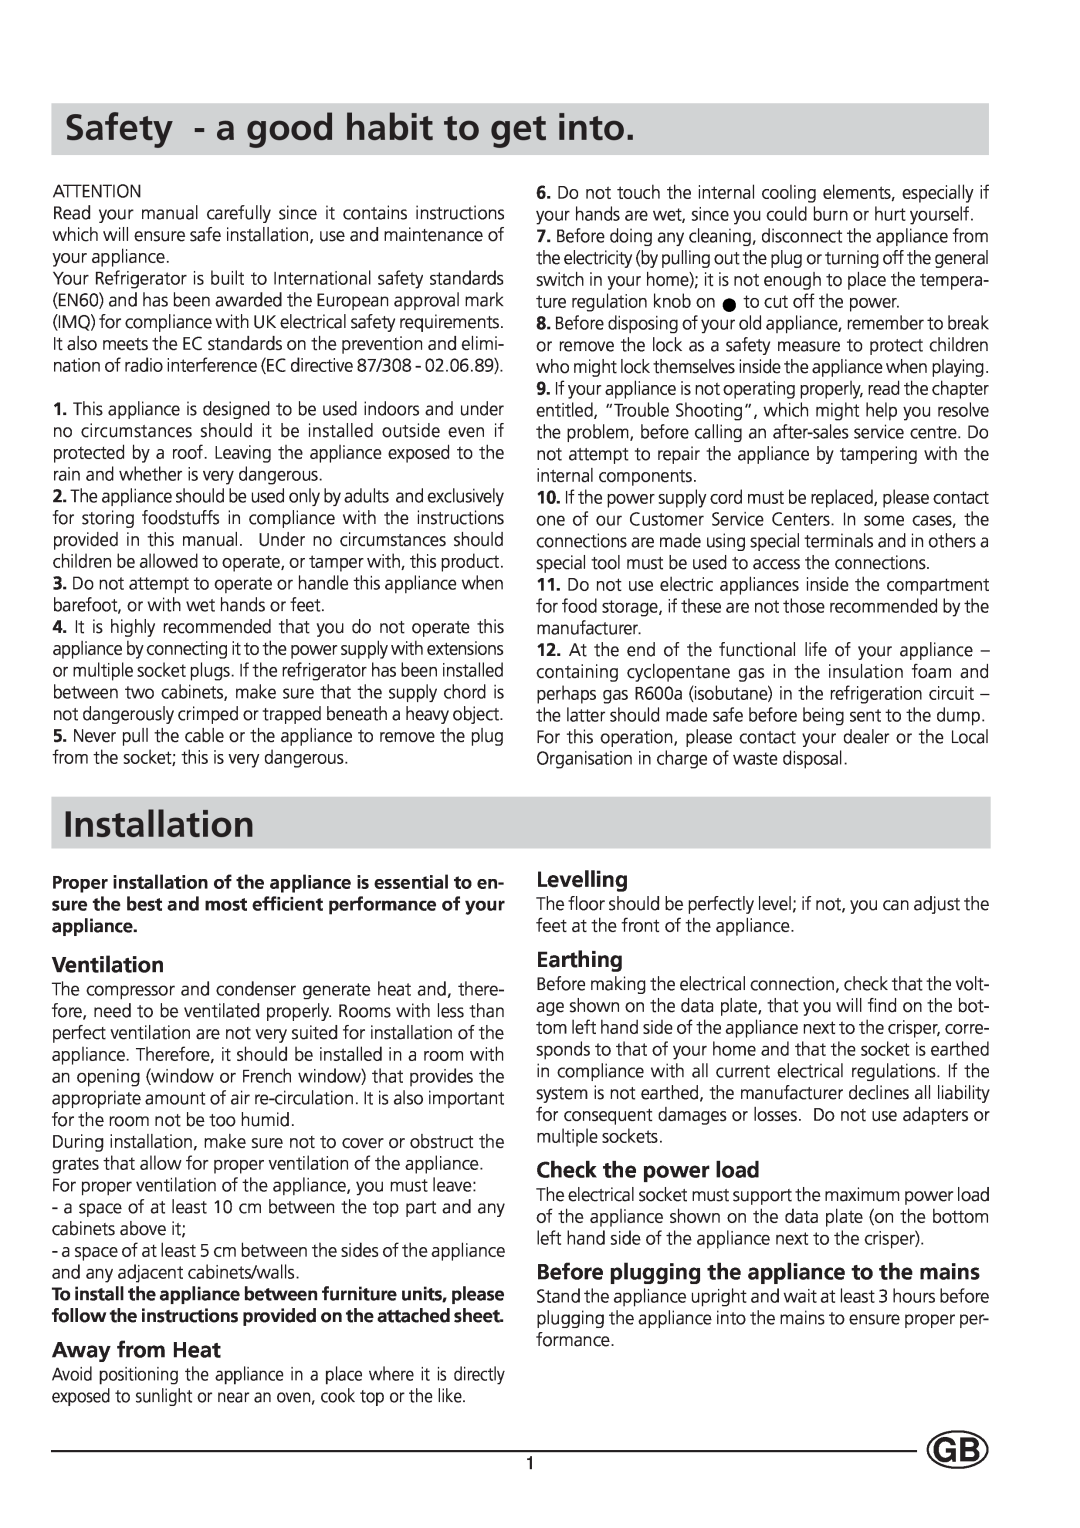 Indesit TA 5 FNF manual Safety - a good habit to get into, Installation, Ventilation, Away from Heat, Levelling, Earthing 